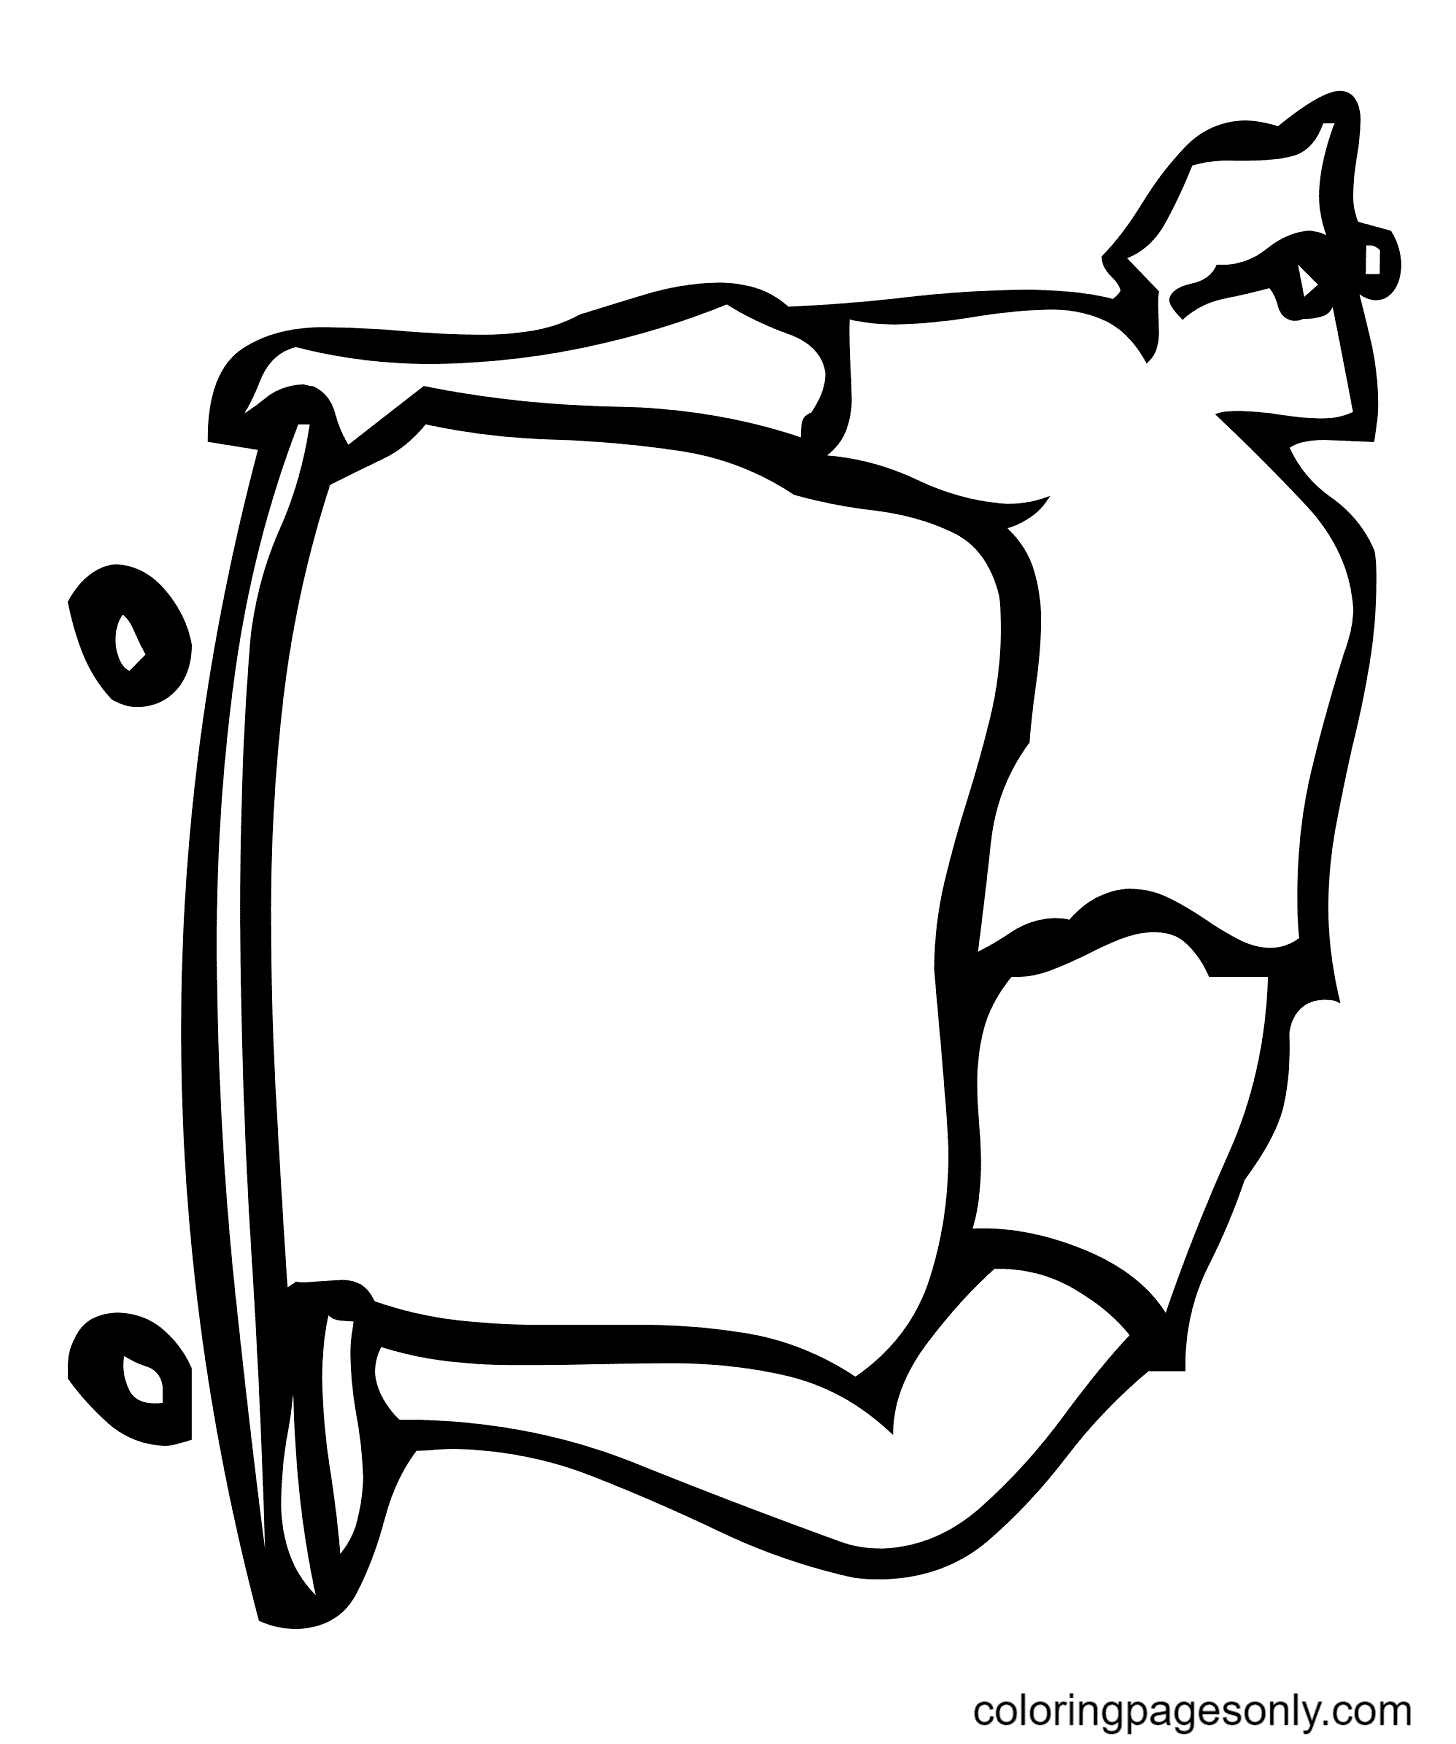 Skateboard Letter D Coloring Page